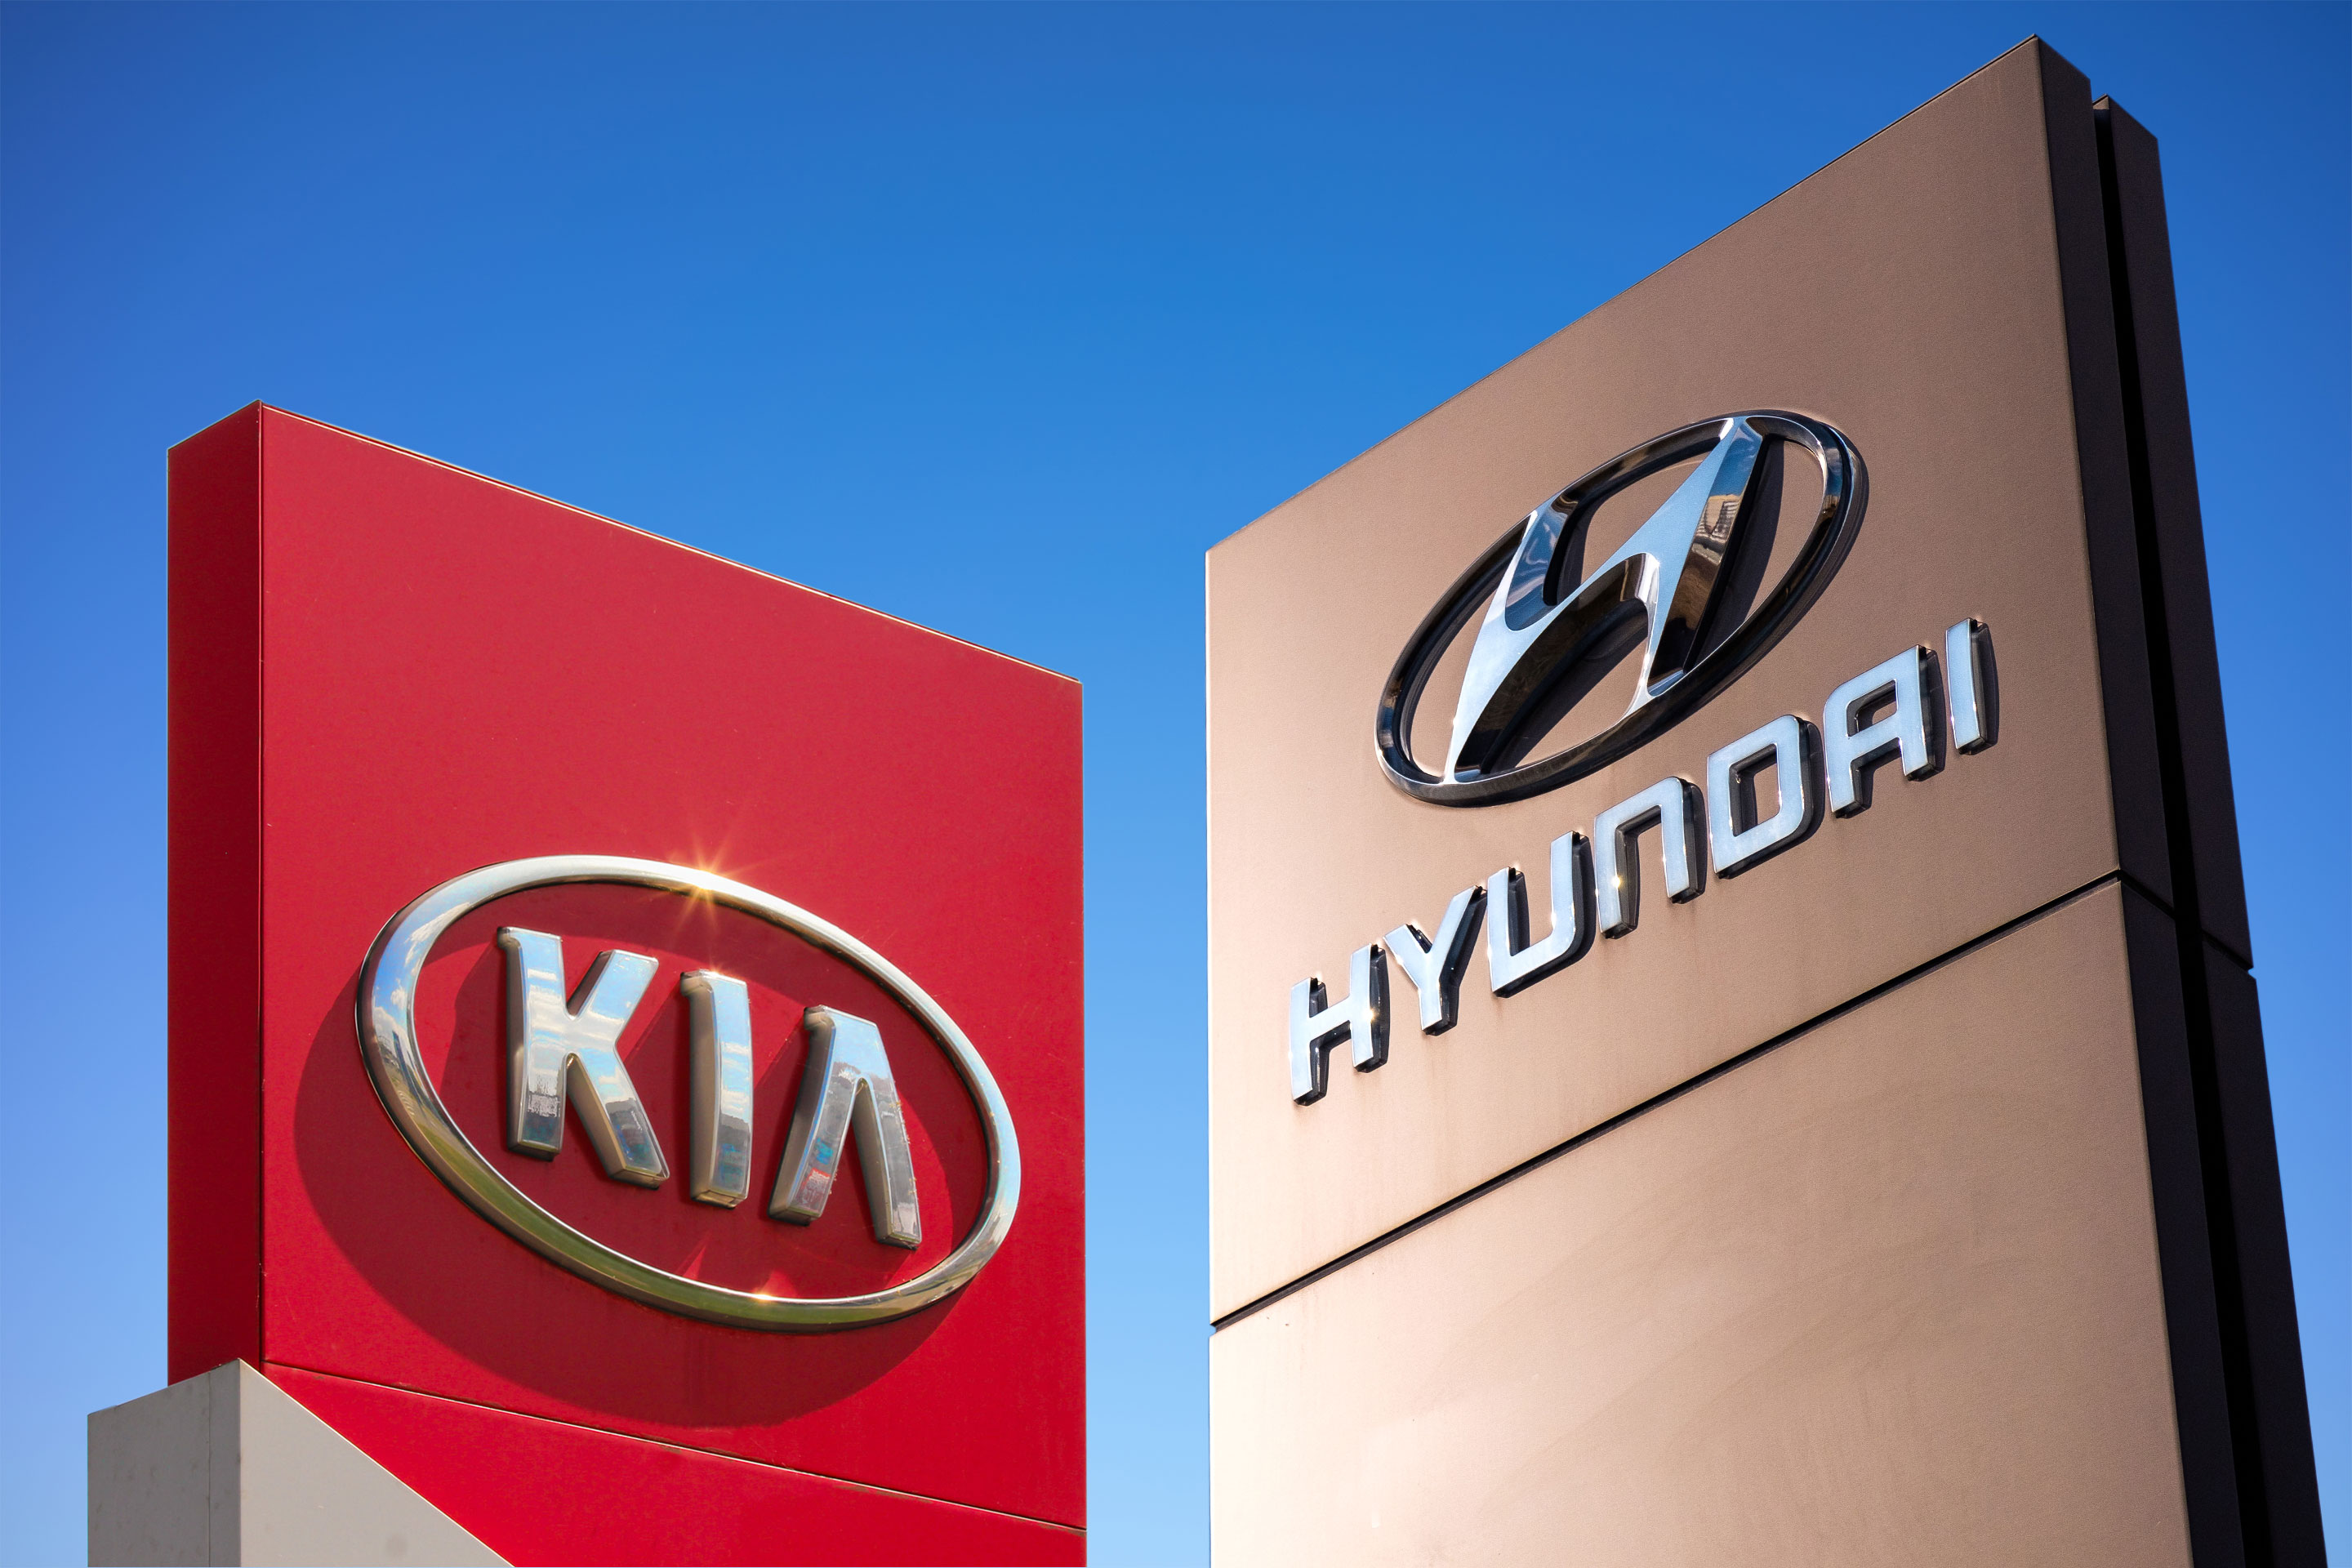 Kia and Hyundai Owners Could Get up to $6,125 From Car Theft Class Action Settlement